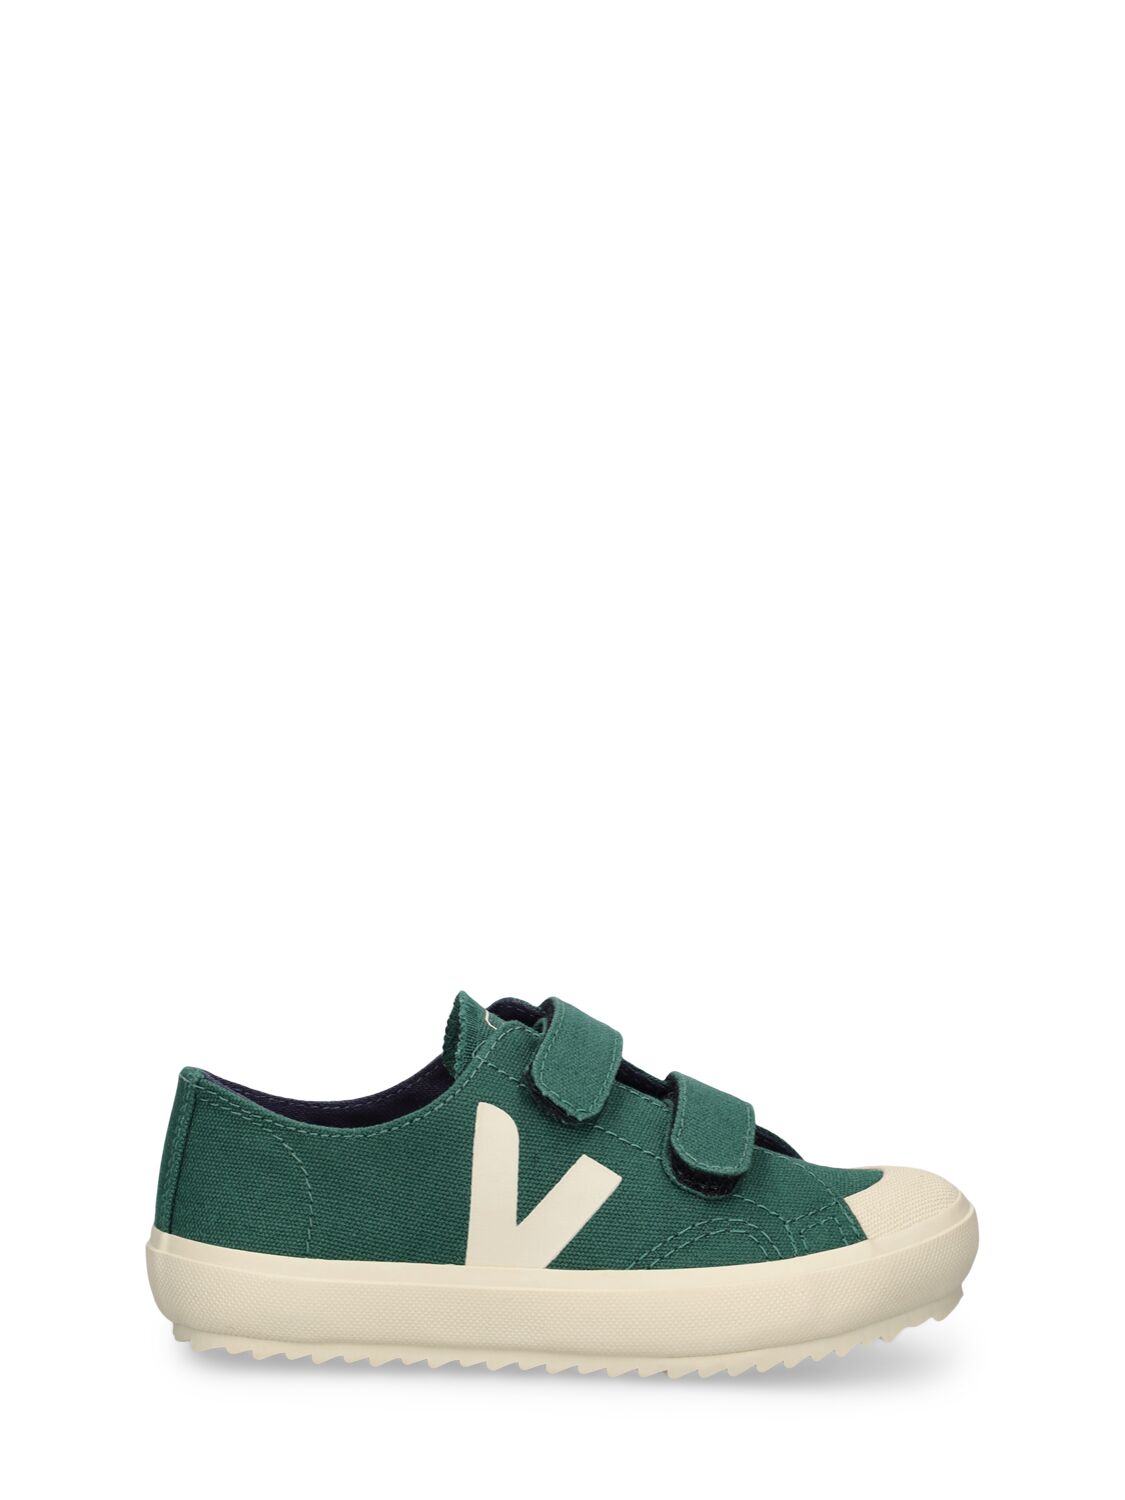 Image of Ollie Cotton Canvas Strap Sneakers